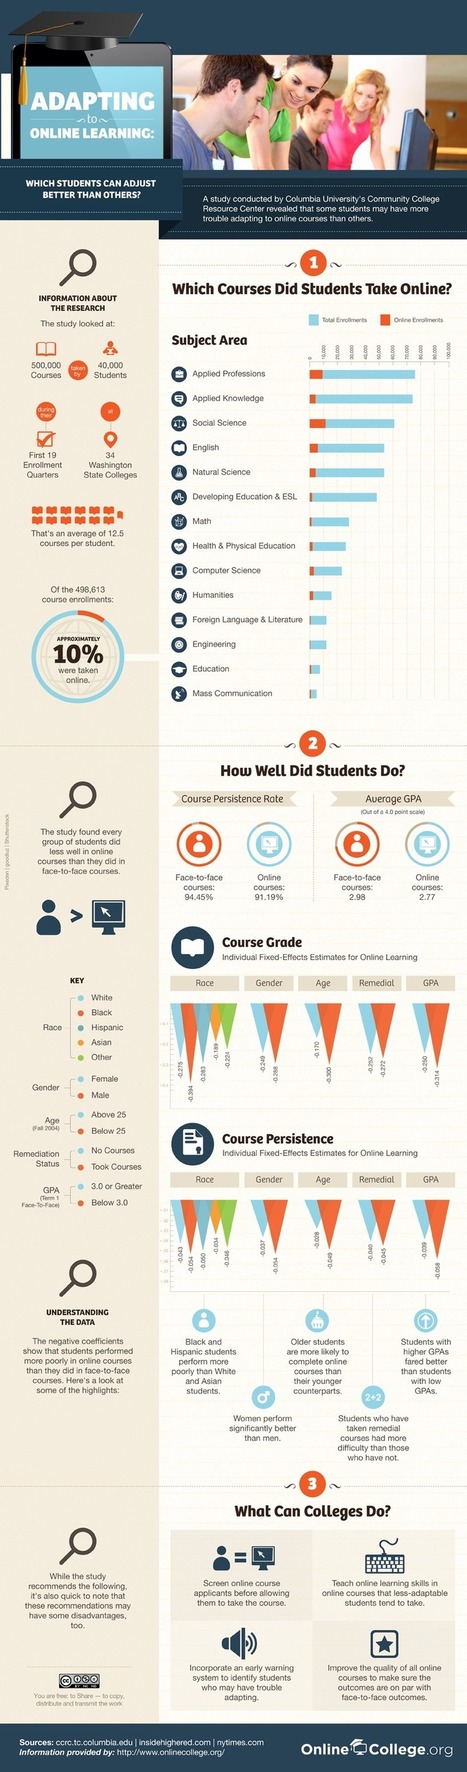 The Characteristics Of A Successful Online Student [Infographic] | 21st Century Learning and Teaching | Scoop.it